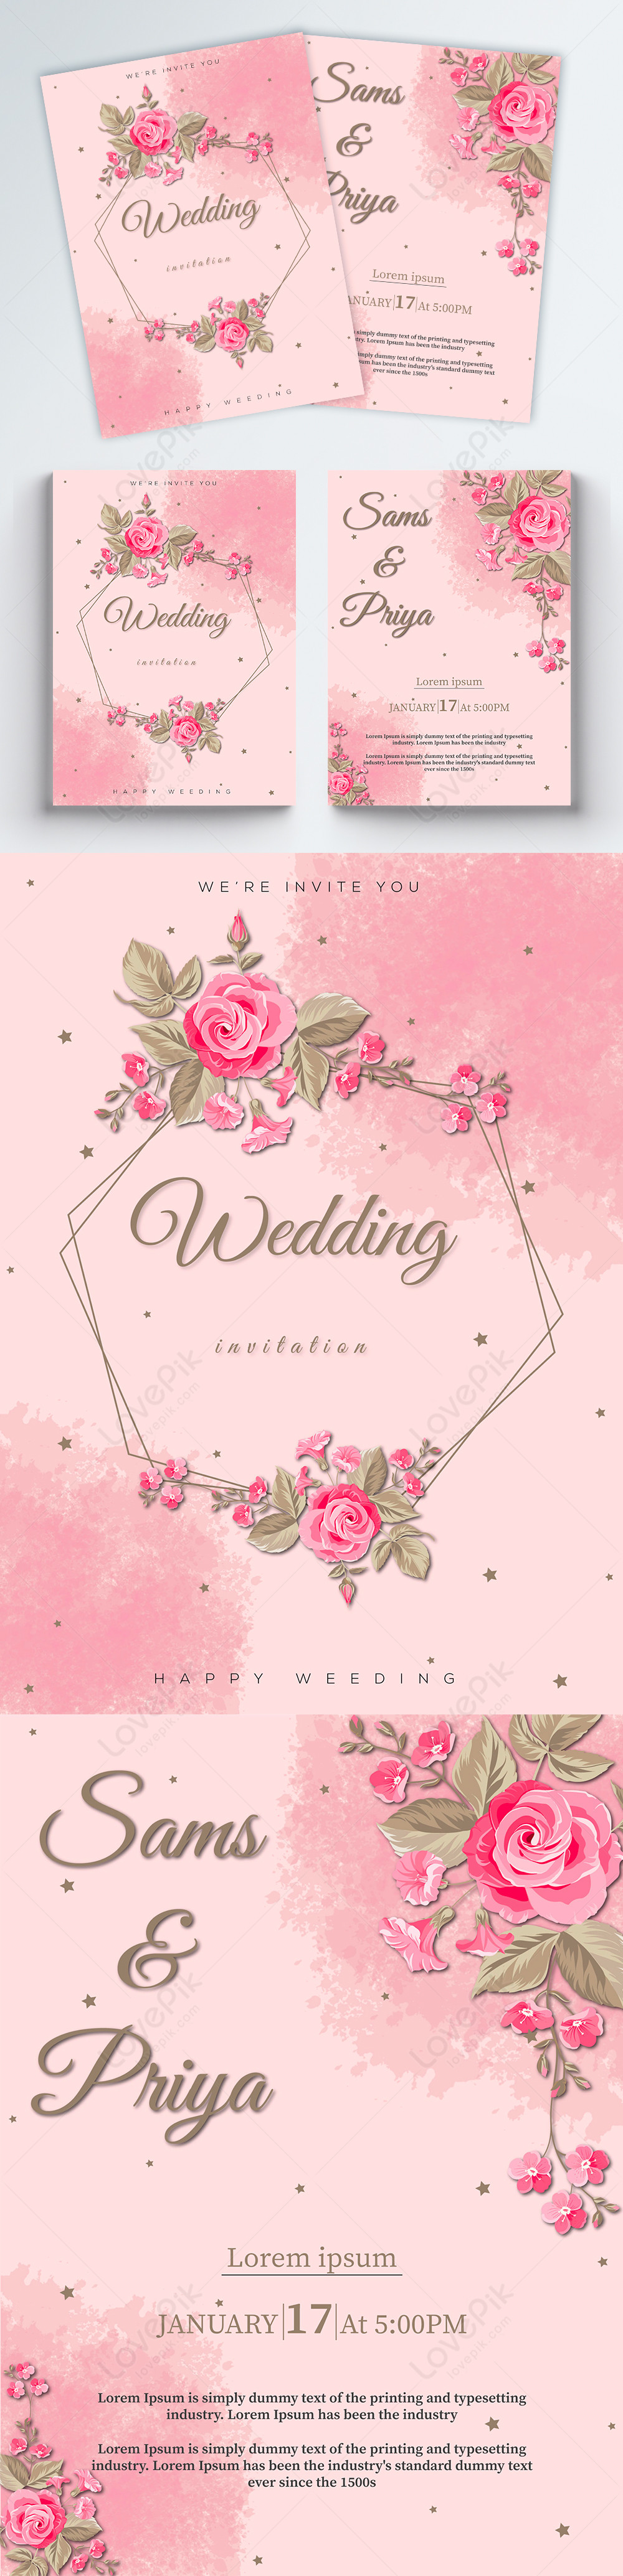 Pink wedding invitation card template image_picture free download ...